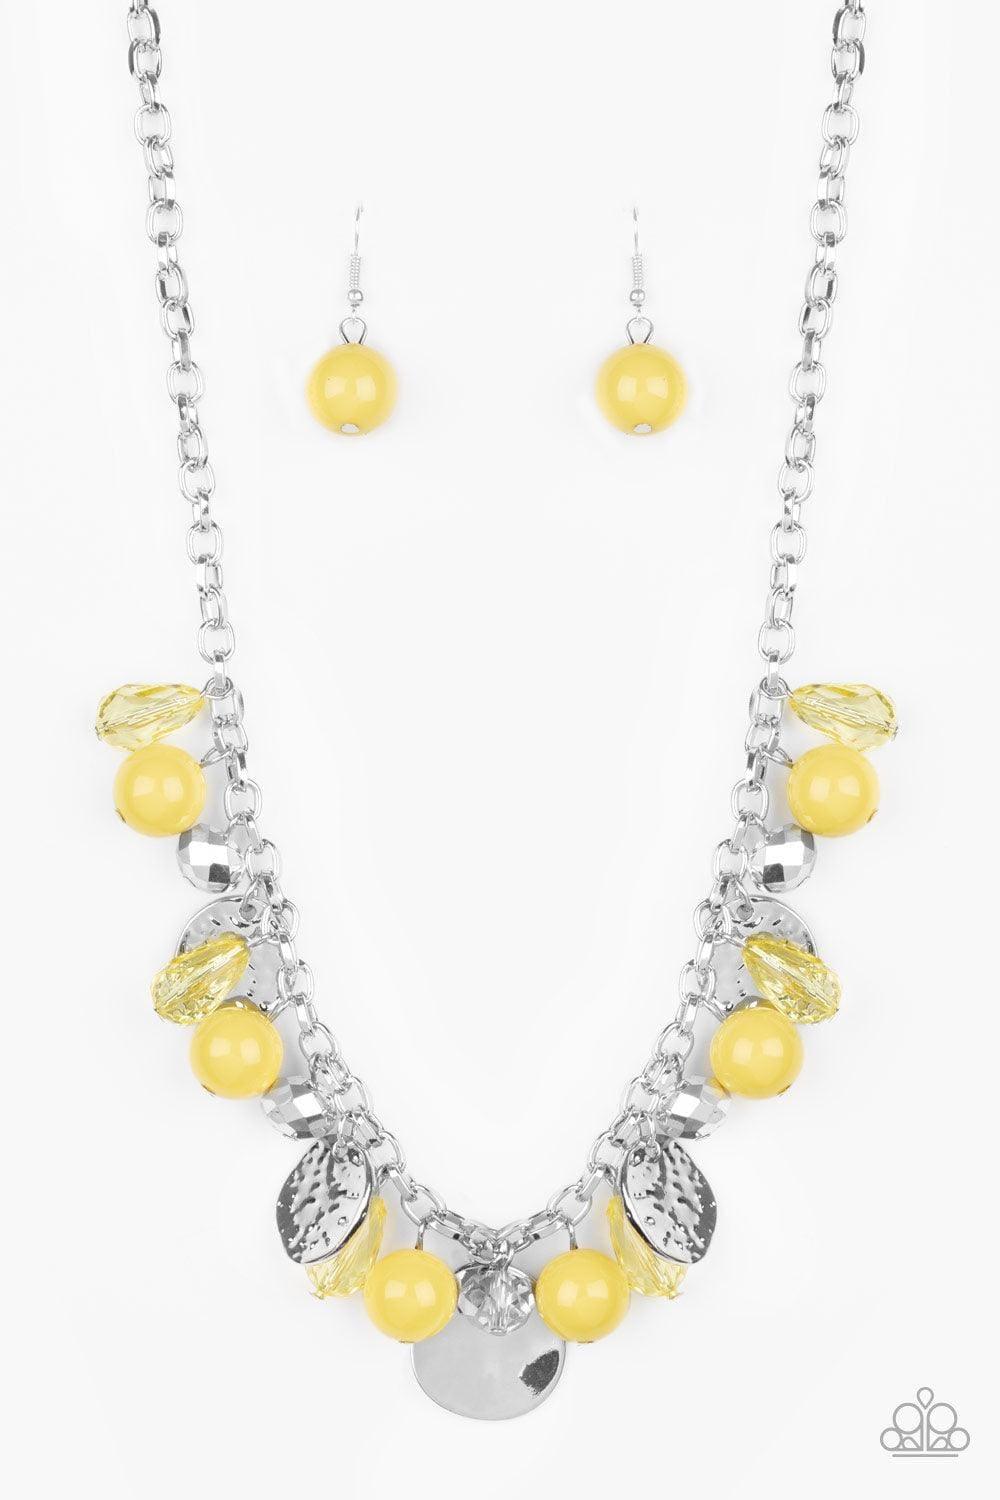 Paparazzi Accessories - Prismatic Sheen - Yellow Necklace - Bling by JessieK